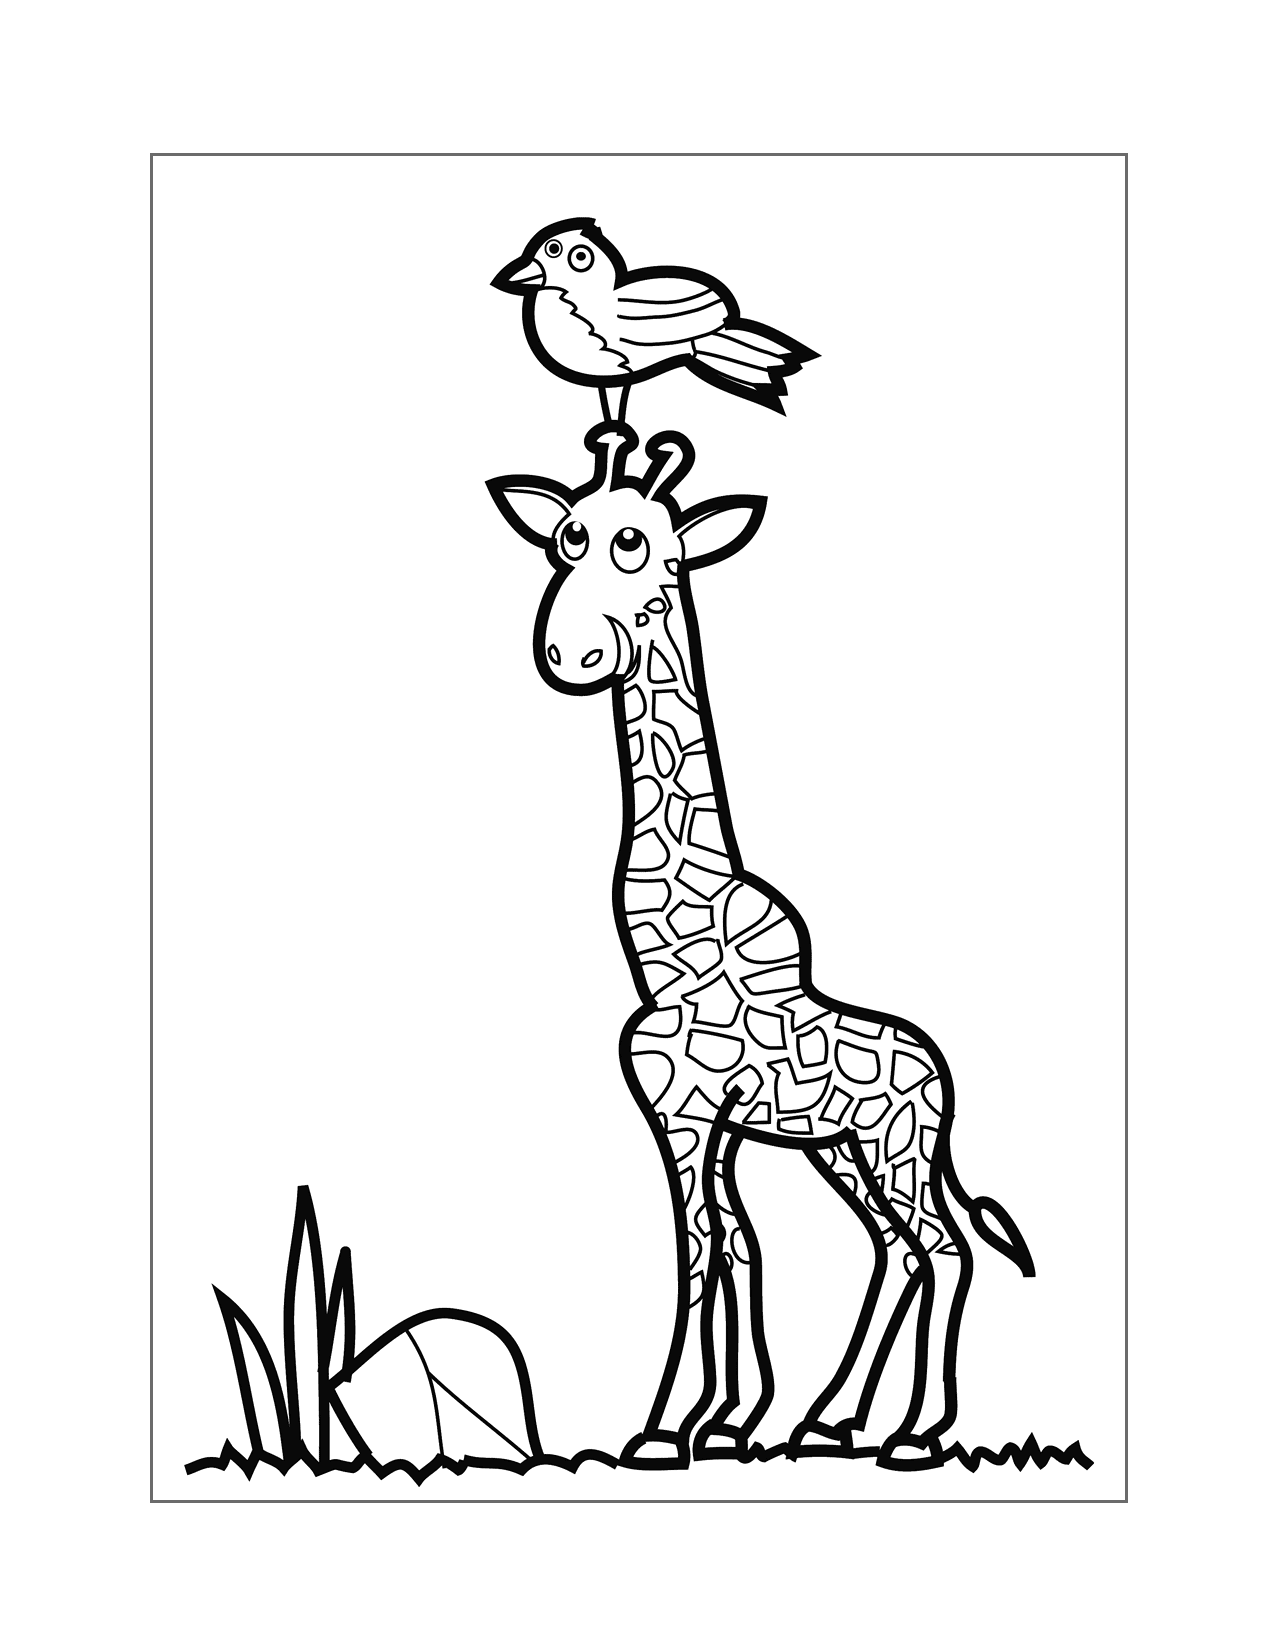 Funny Giraffe With Bird On Its Head Coloring Page